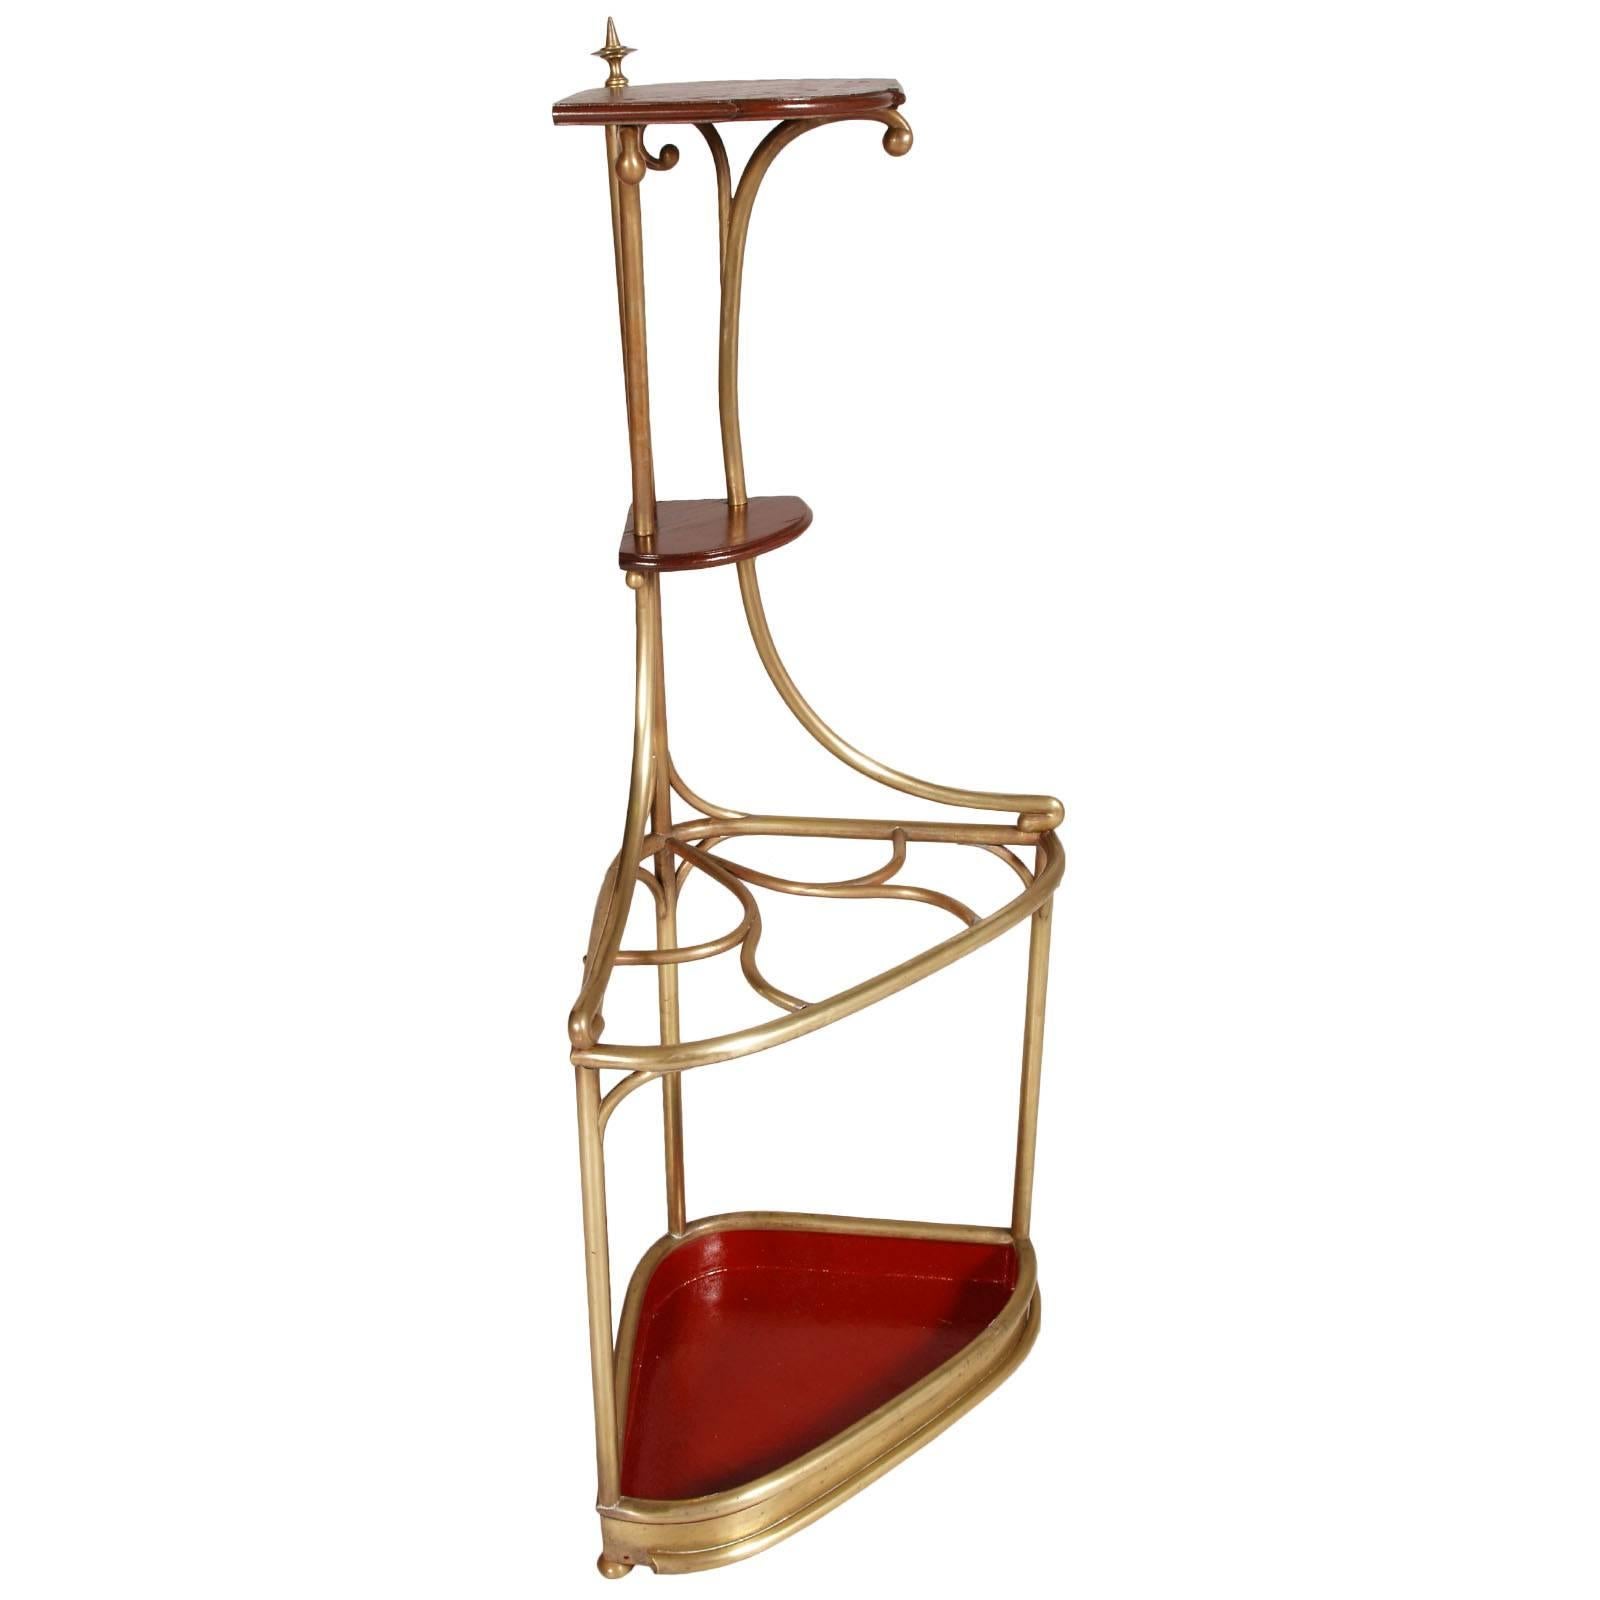 Early 20th century corner umbrella stand Art Nouveau in brass and oak attributable to Josef Hoffmann- Wiener Werkstätte -
An artistic and unique piece recovered in the Zacherlhaus- Wien 

Measure cm: H 143, W 45x45, D 40.

Notes on the